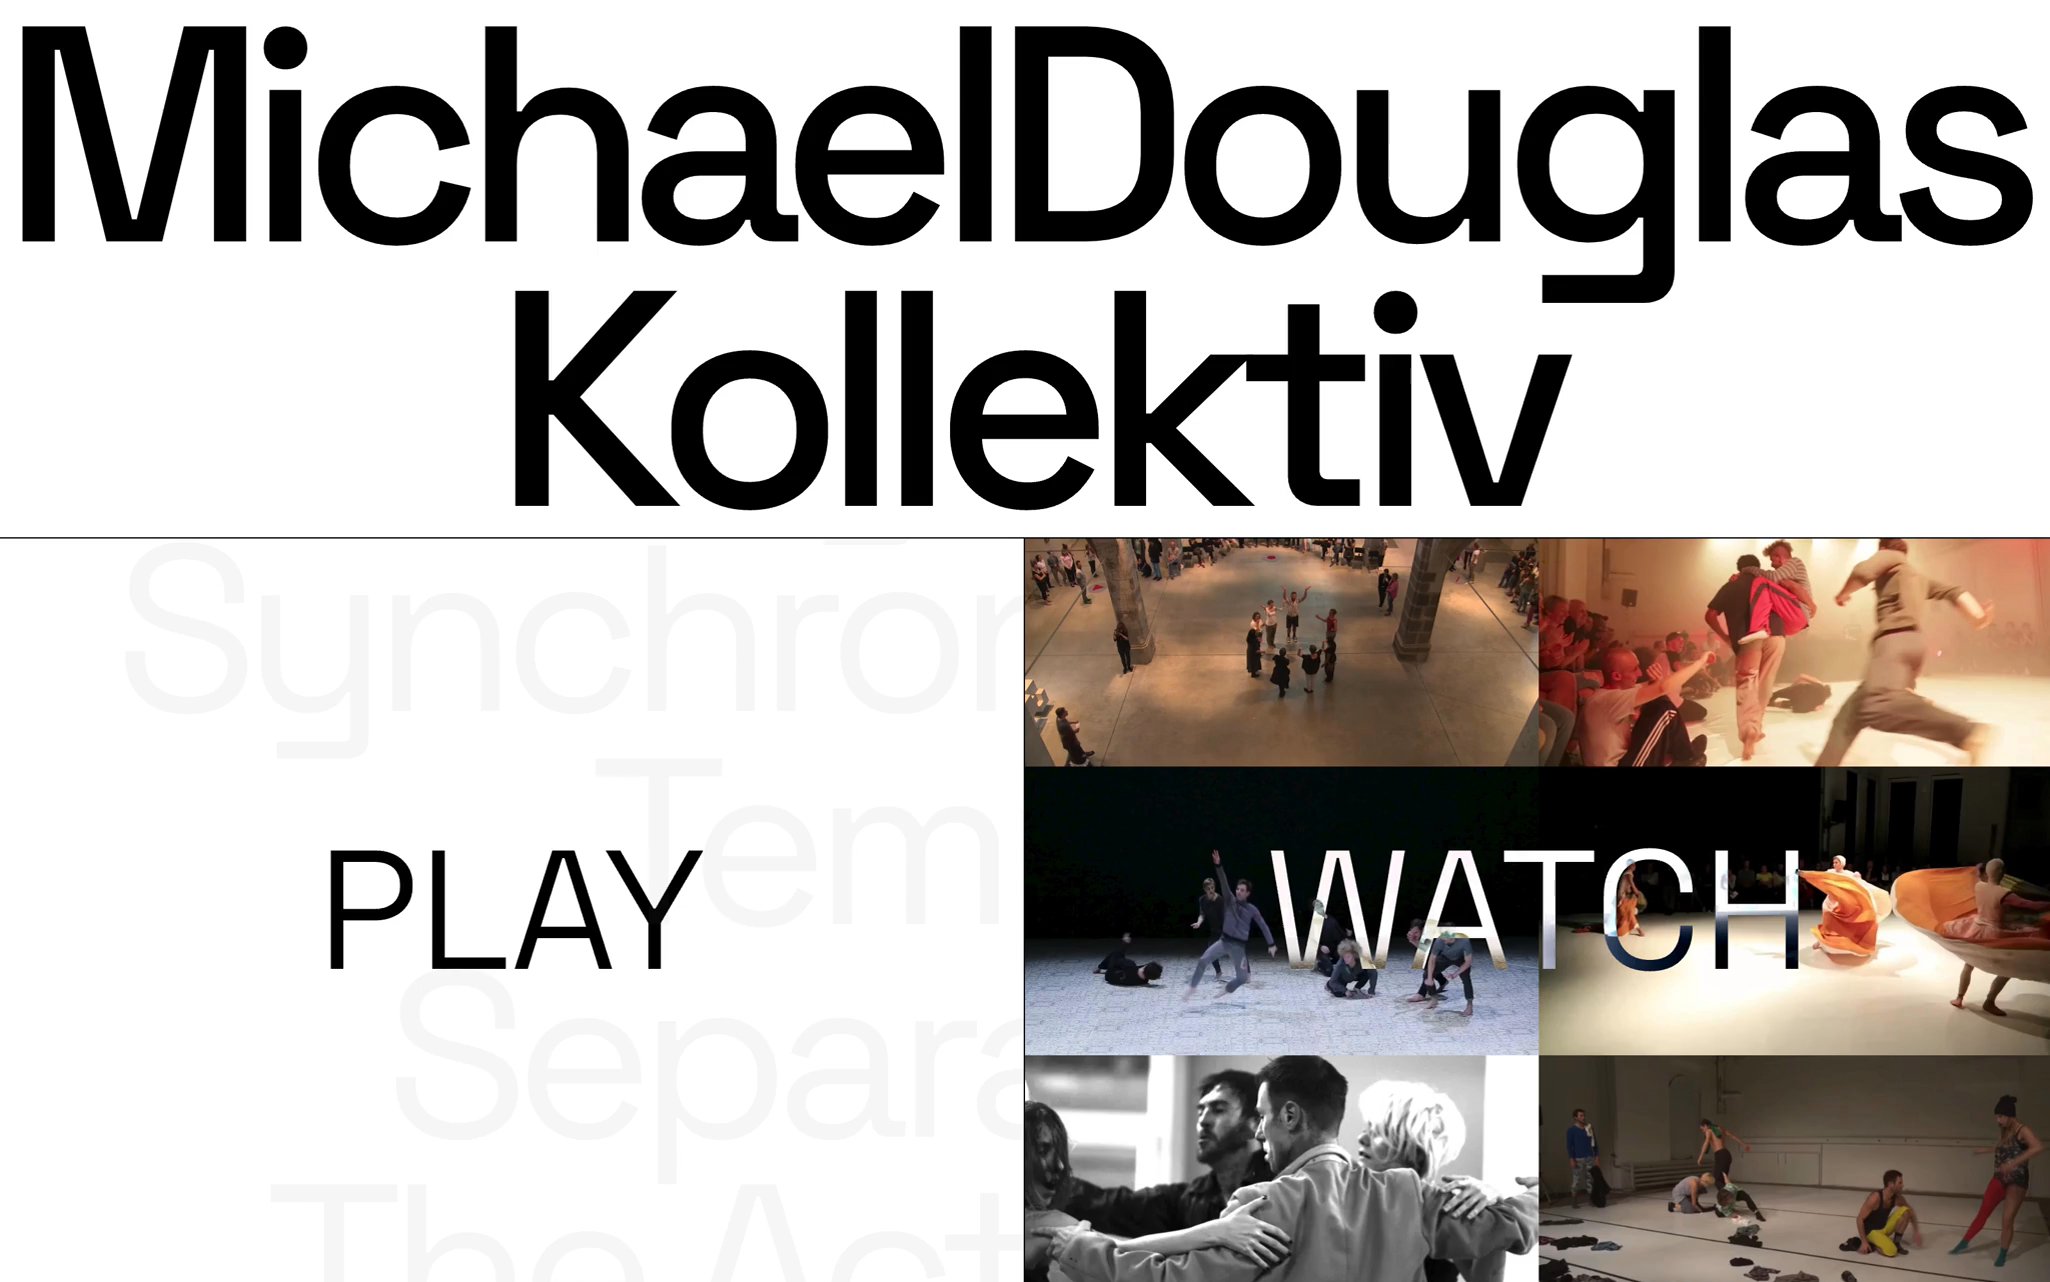 Screenshot from the MD Kollektiv homepage with a large logo headline and two sections titled “Play” and “Watch”